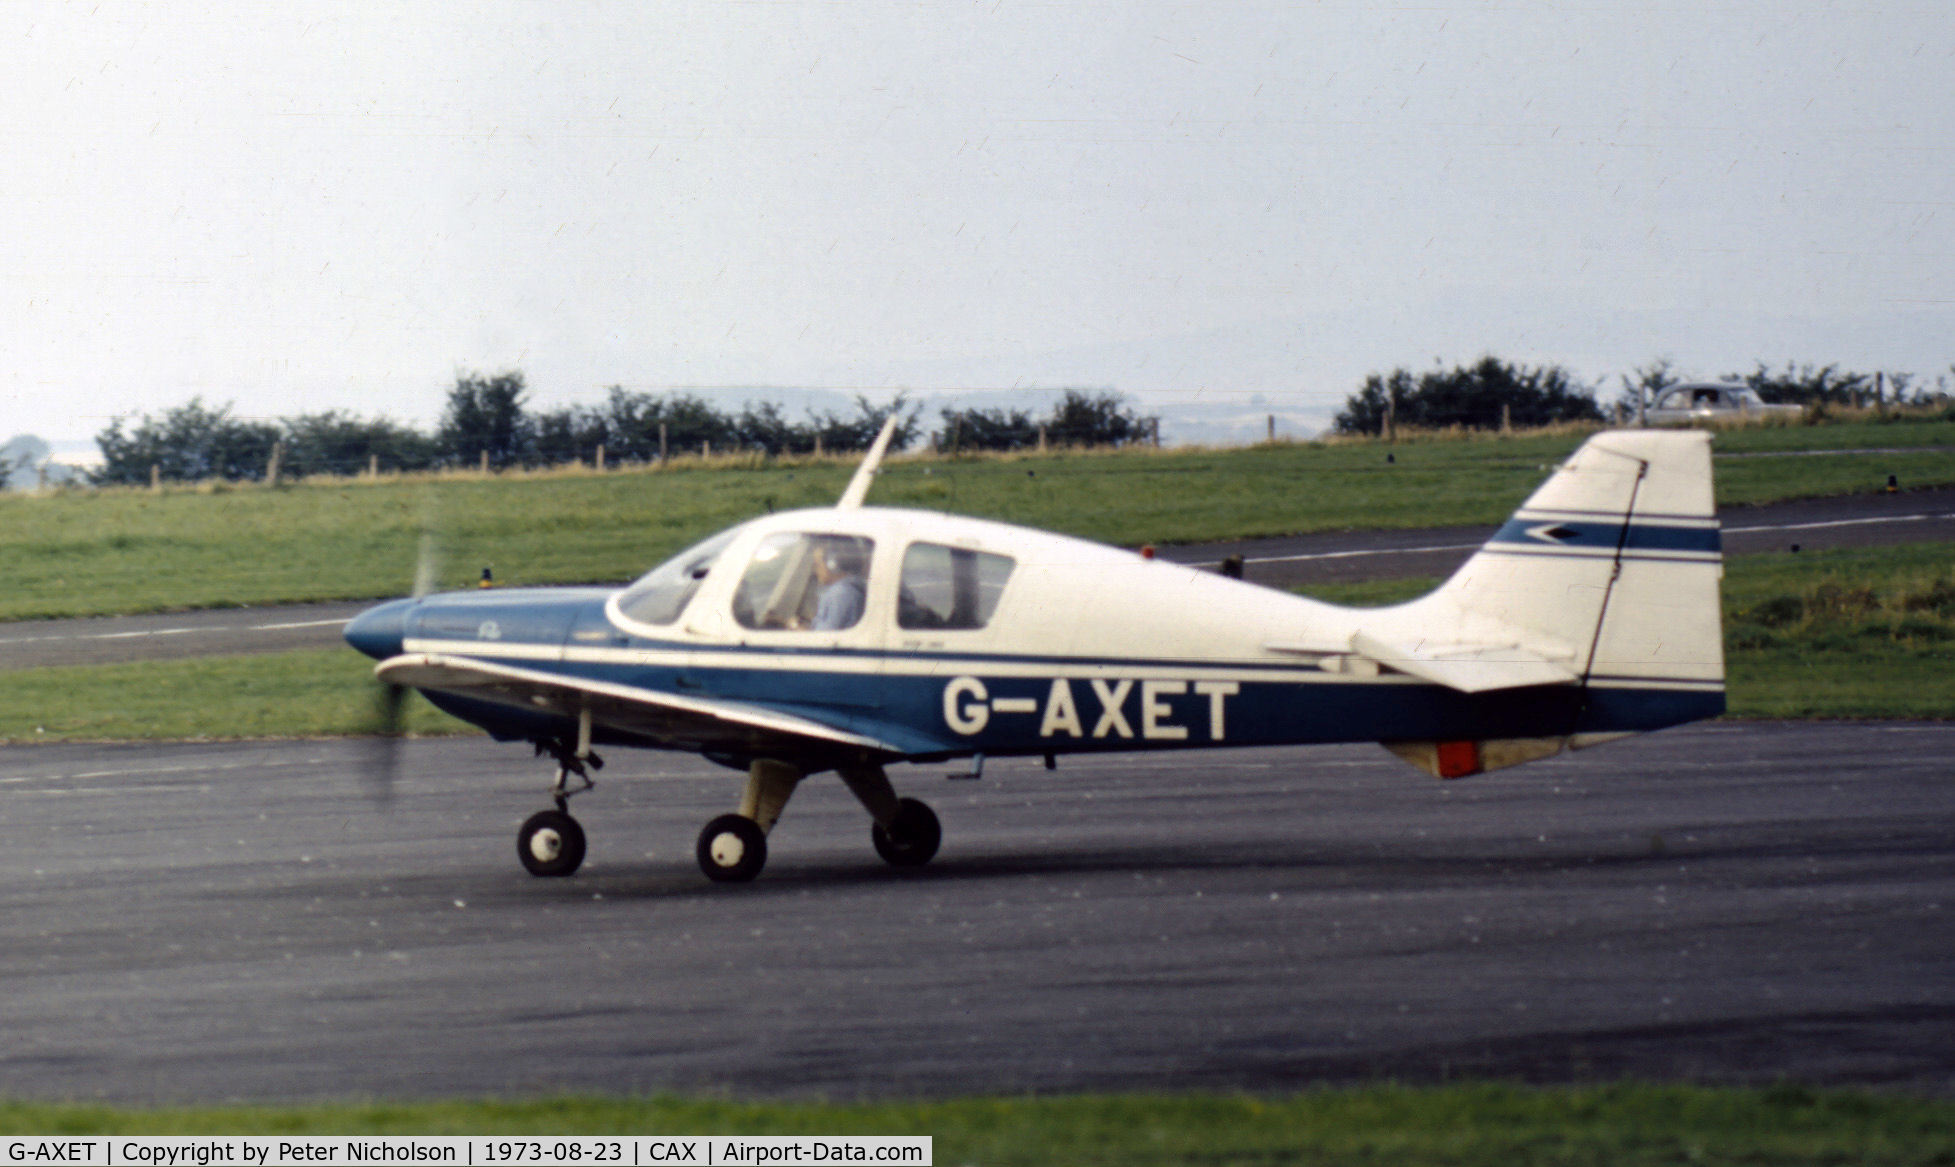 G-AXET, 1969 Beagle B-121 Pup Series 1 (Pup 100) C/N B121-057, Beagle Pup of C.S.E. Aviation operating from Carlisle in rhe Summer of 1973